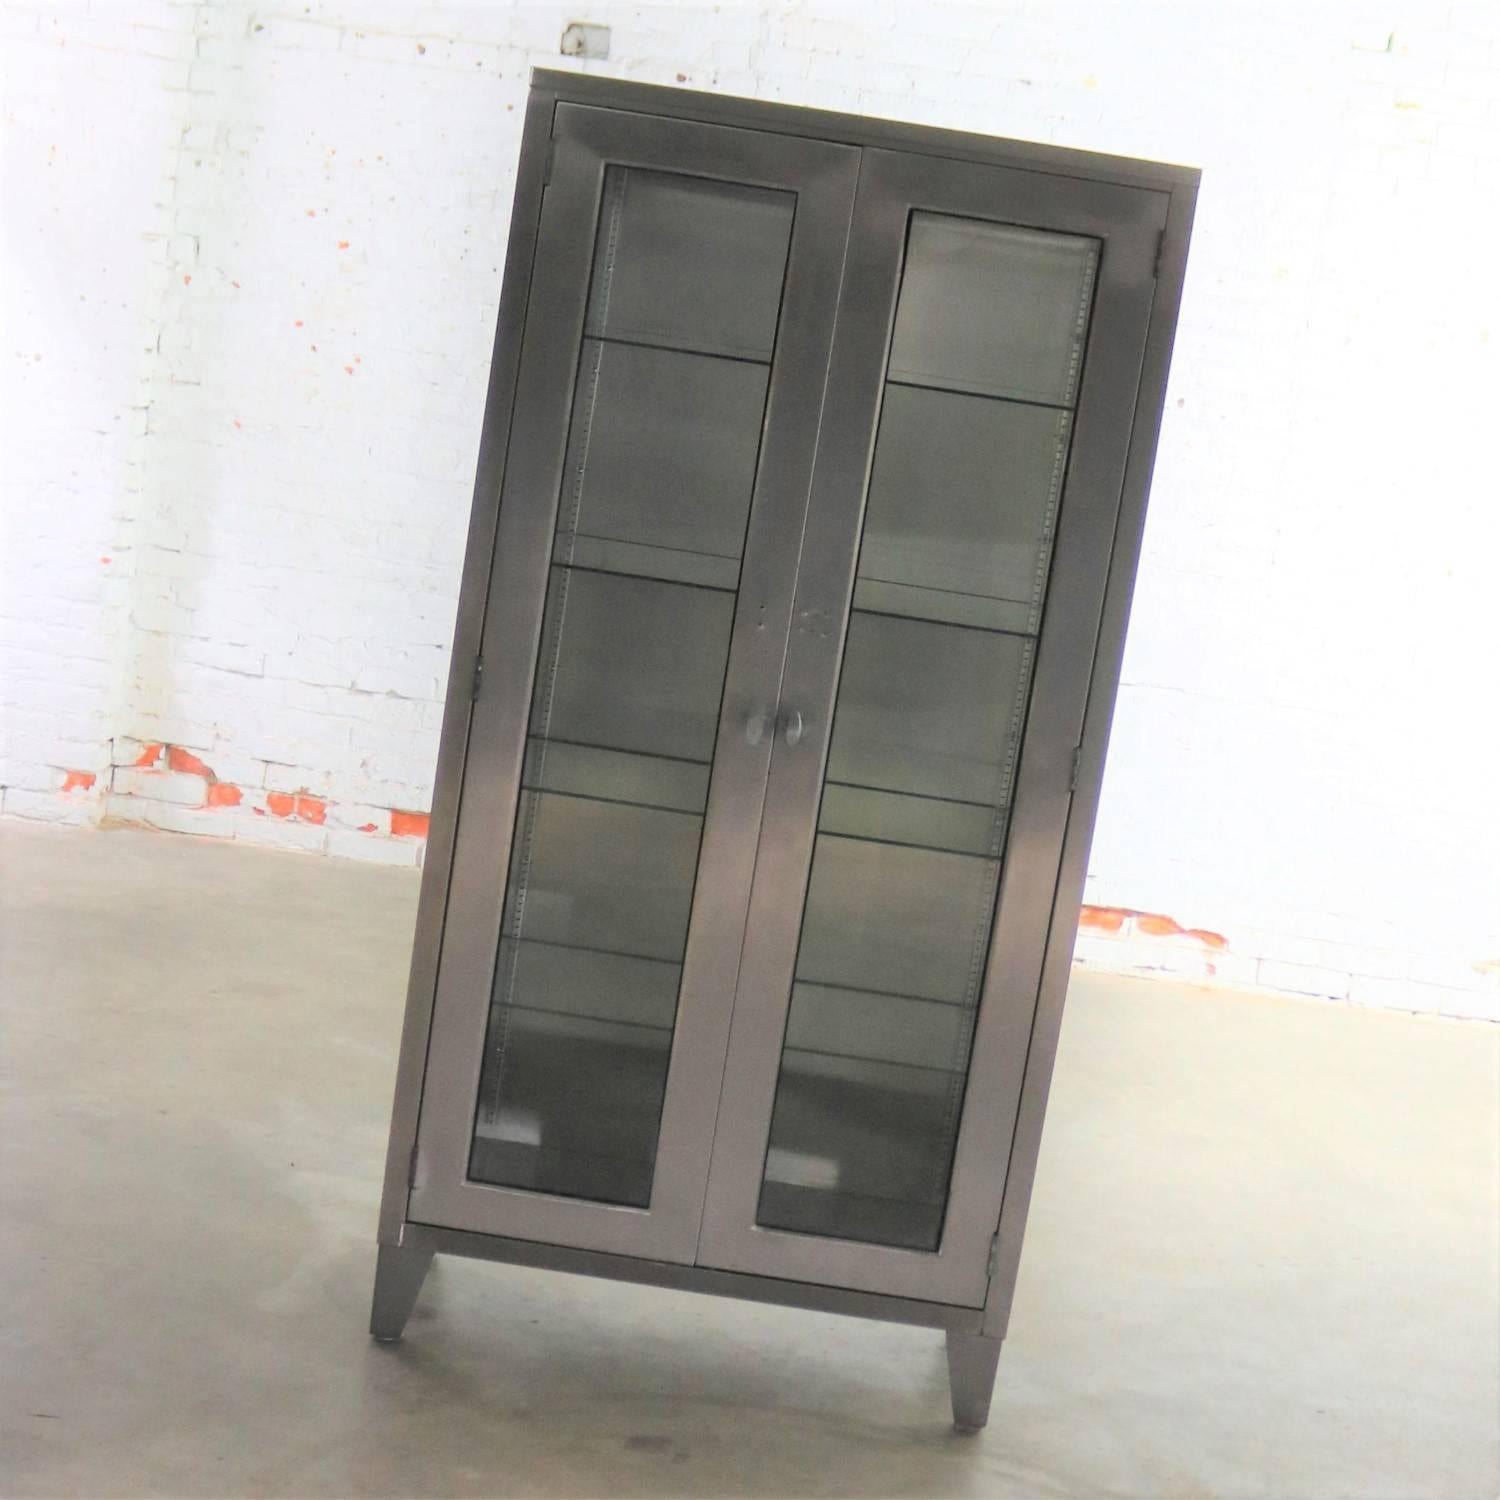 Vintage Stainless Steel Industrial Display Apothecary Medical Cabinet Glass Door 8